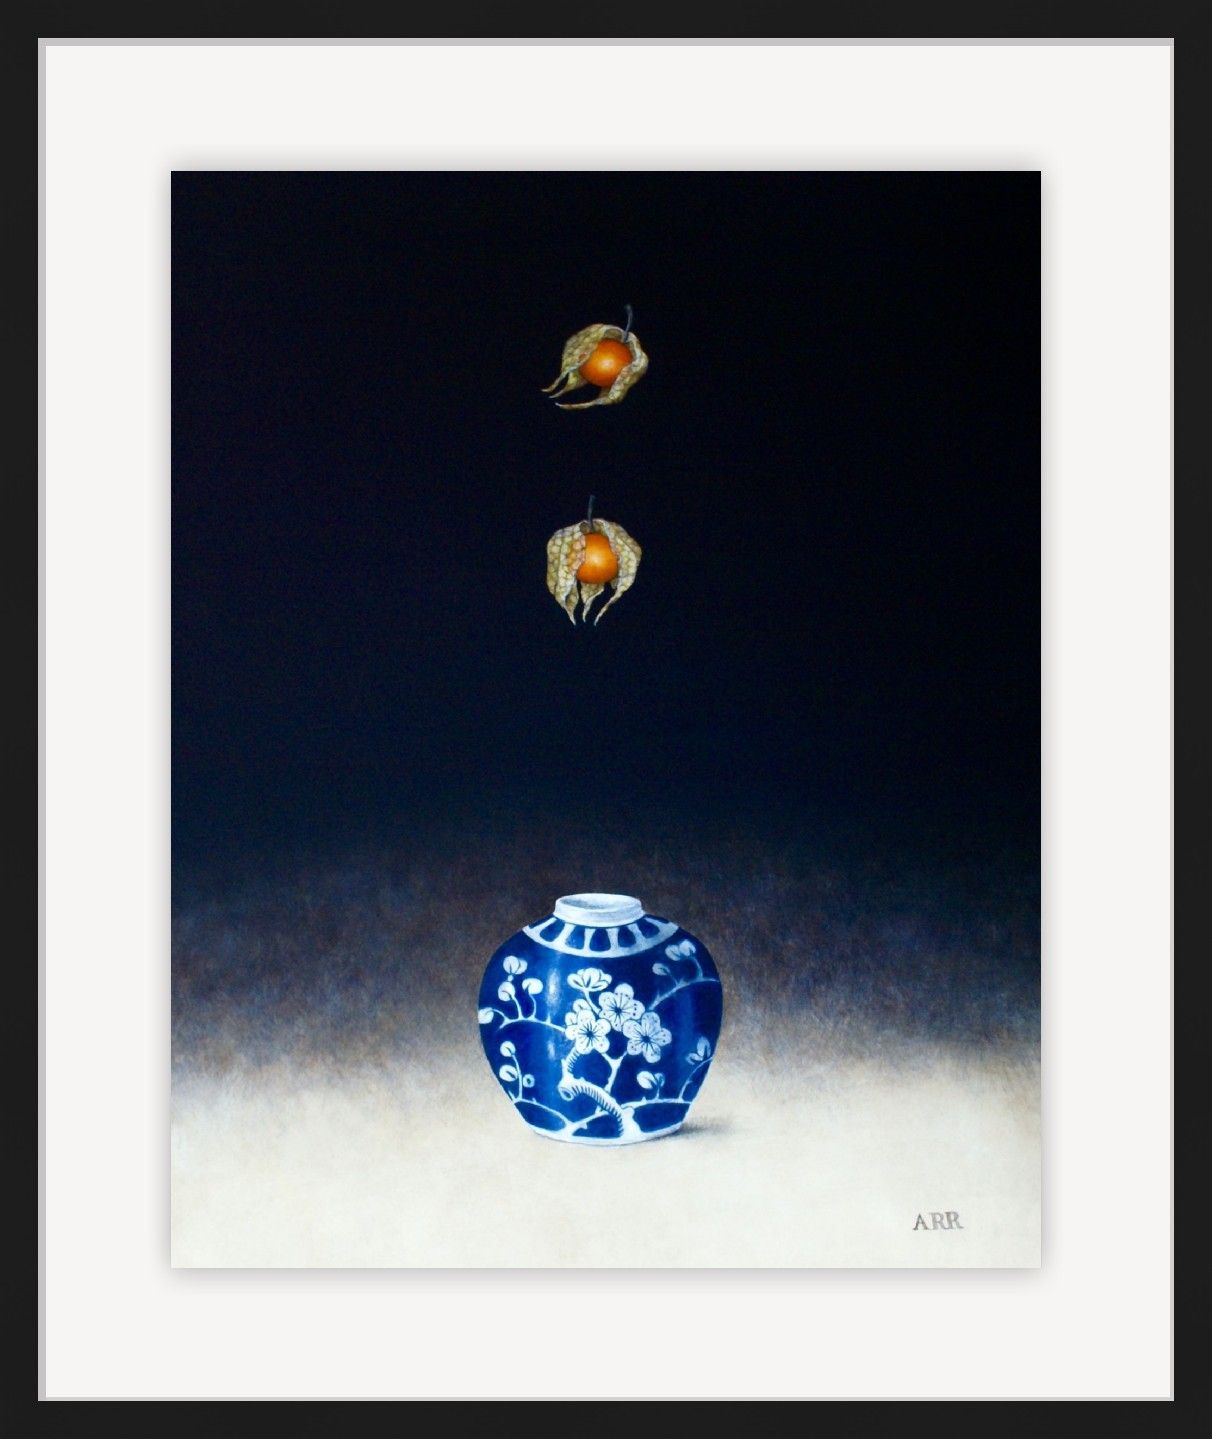 Falling Physalis with Small Blue Ginger Jar by Alison Rankin